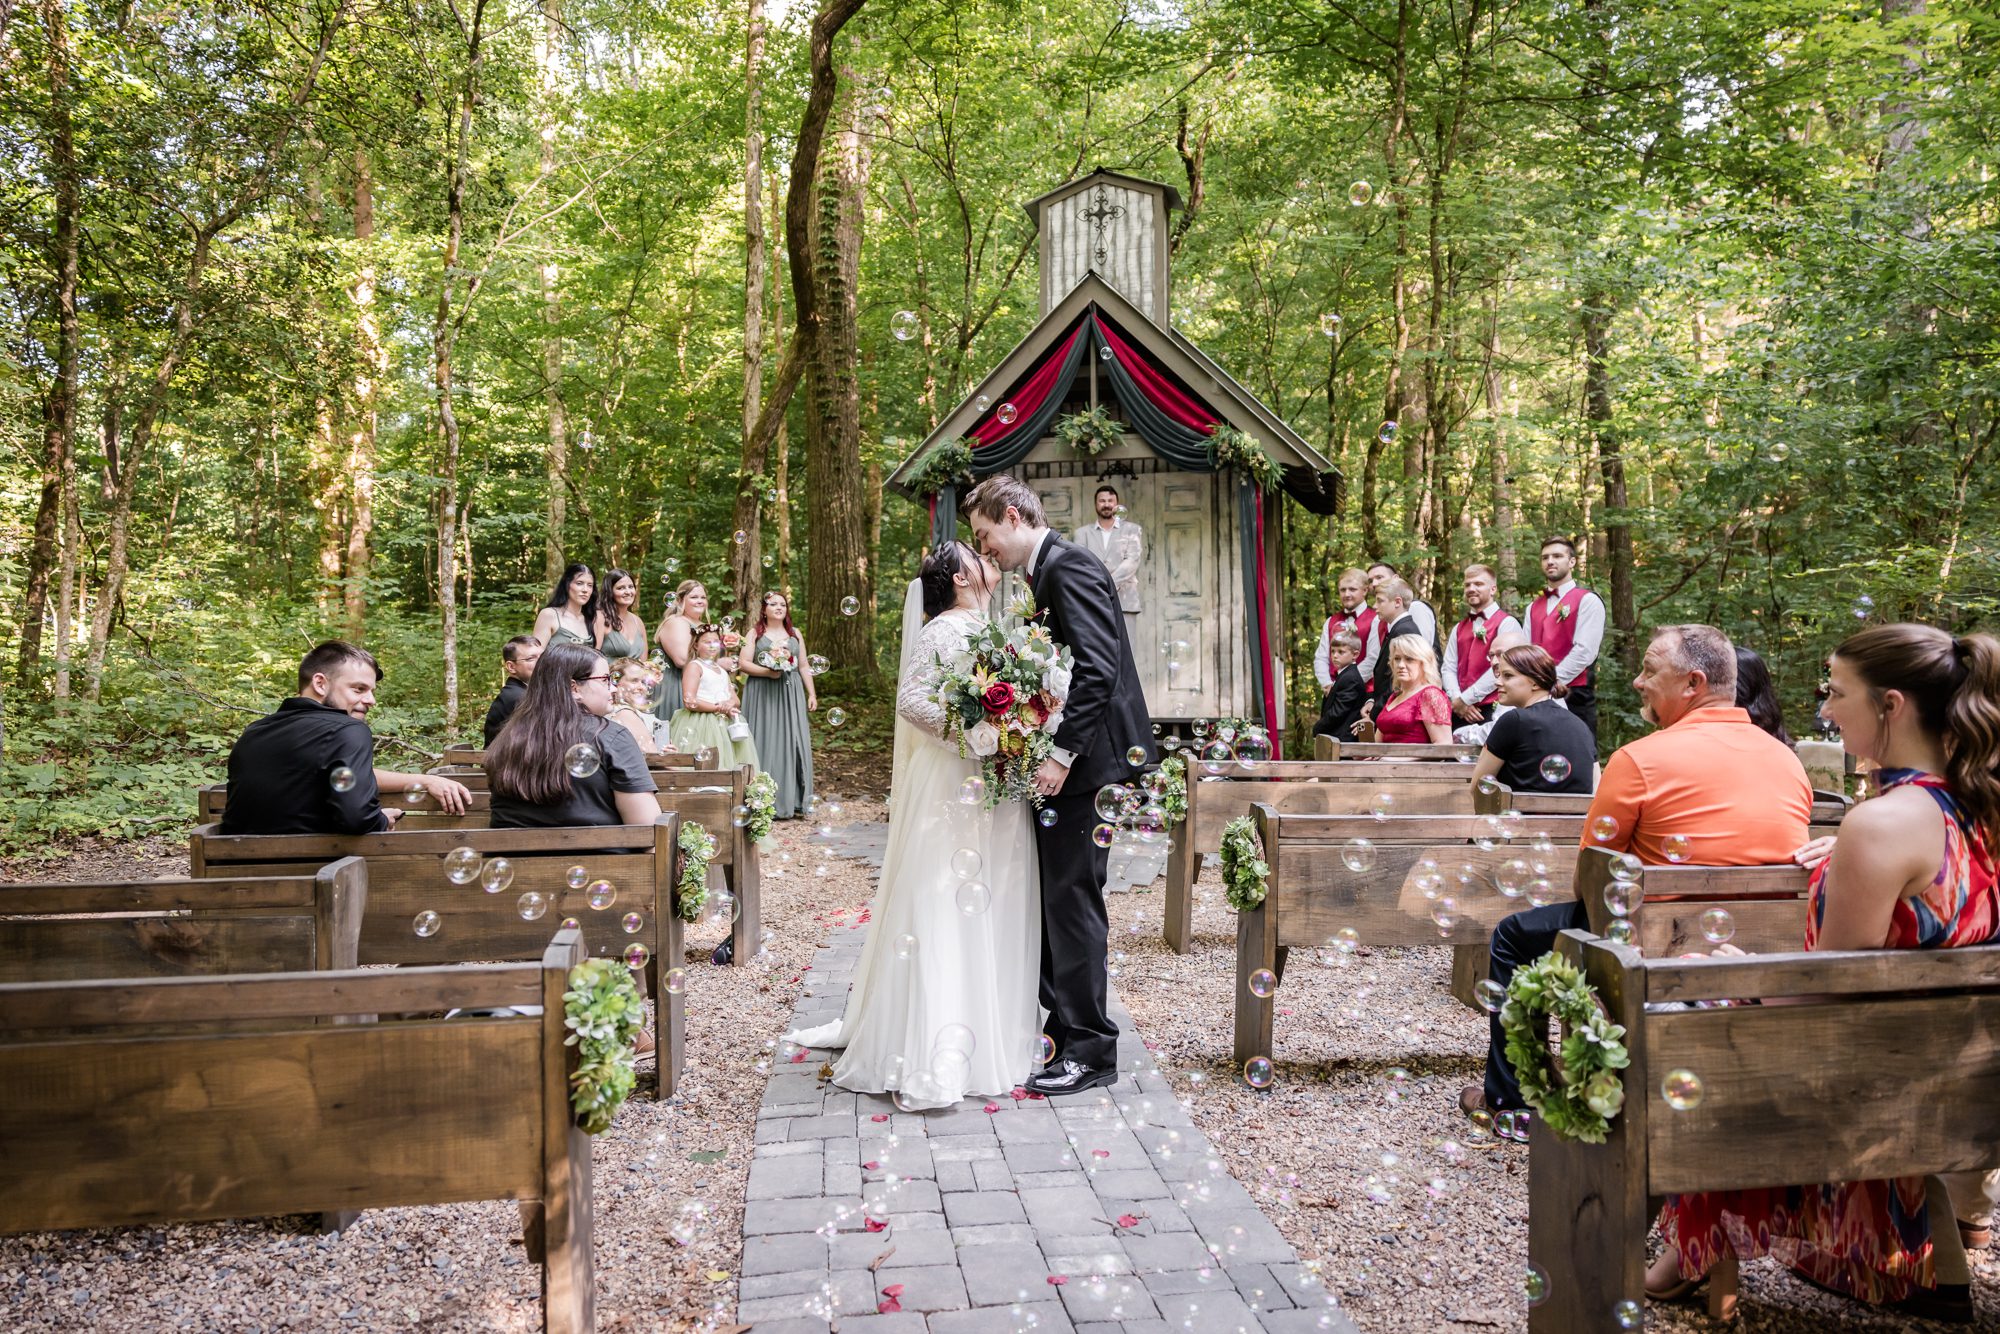 About - Smoky Mountain Wedding Chapel - Chapel in the Hollow